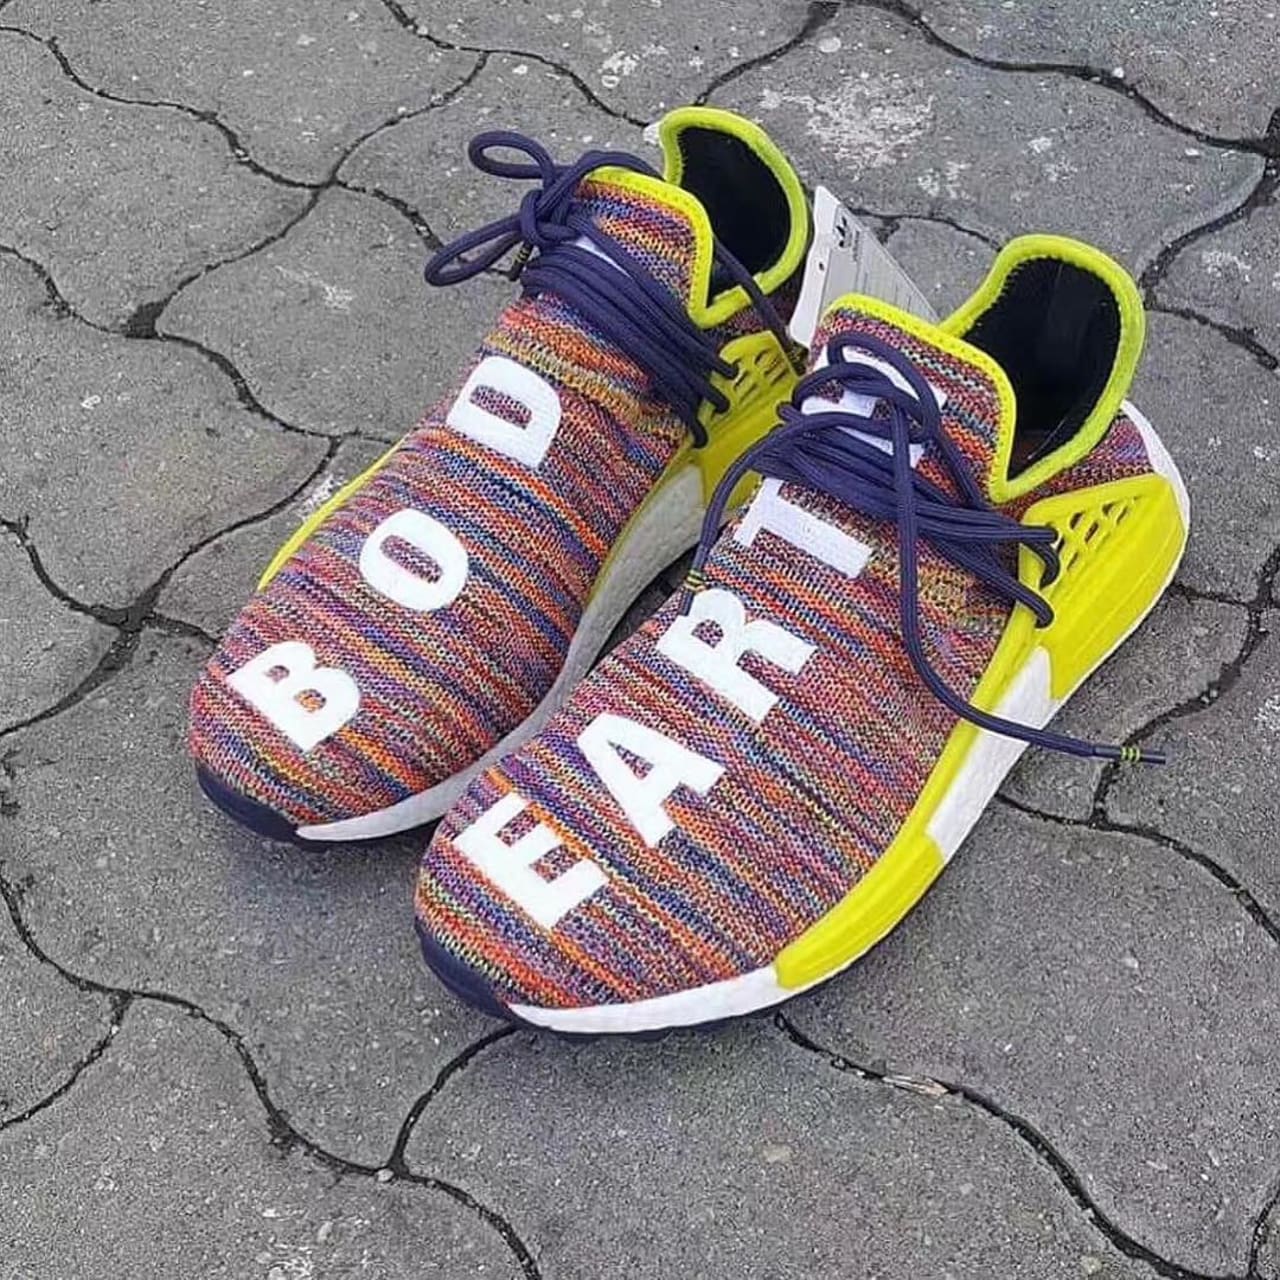 x Adidas NMD Trail Multicolor Body Earth Release Date | Sole Collector